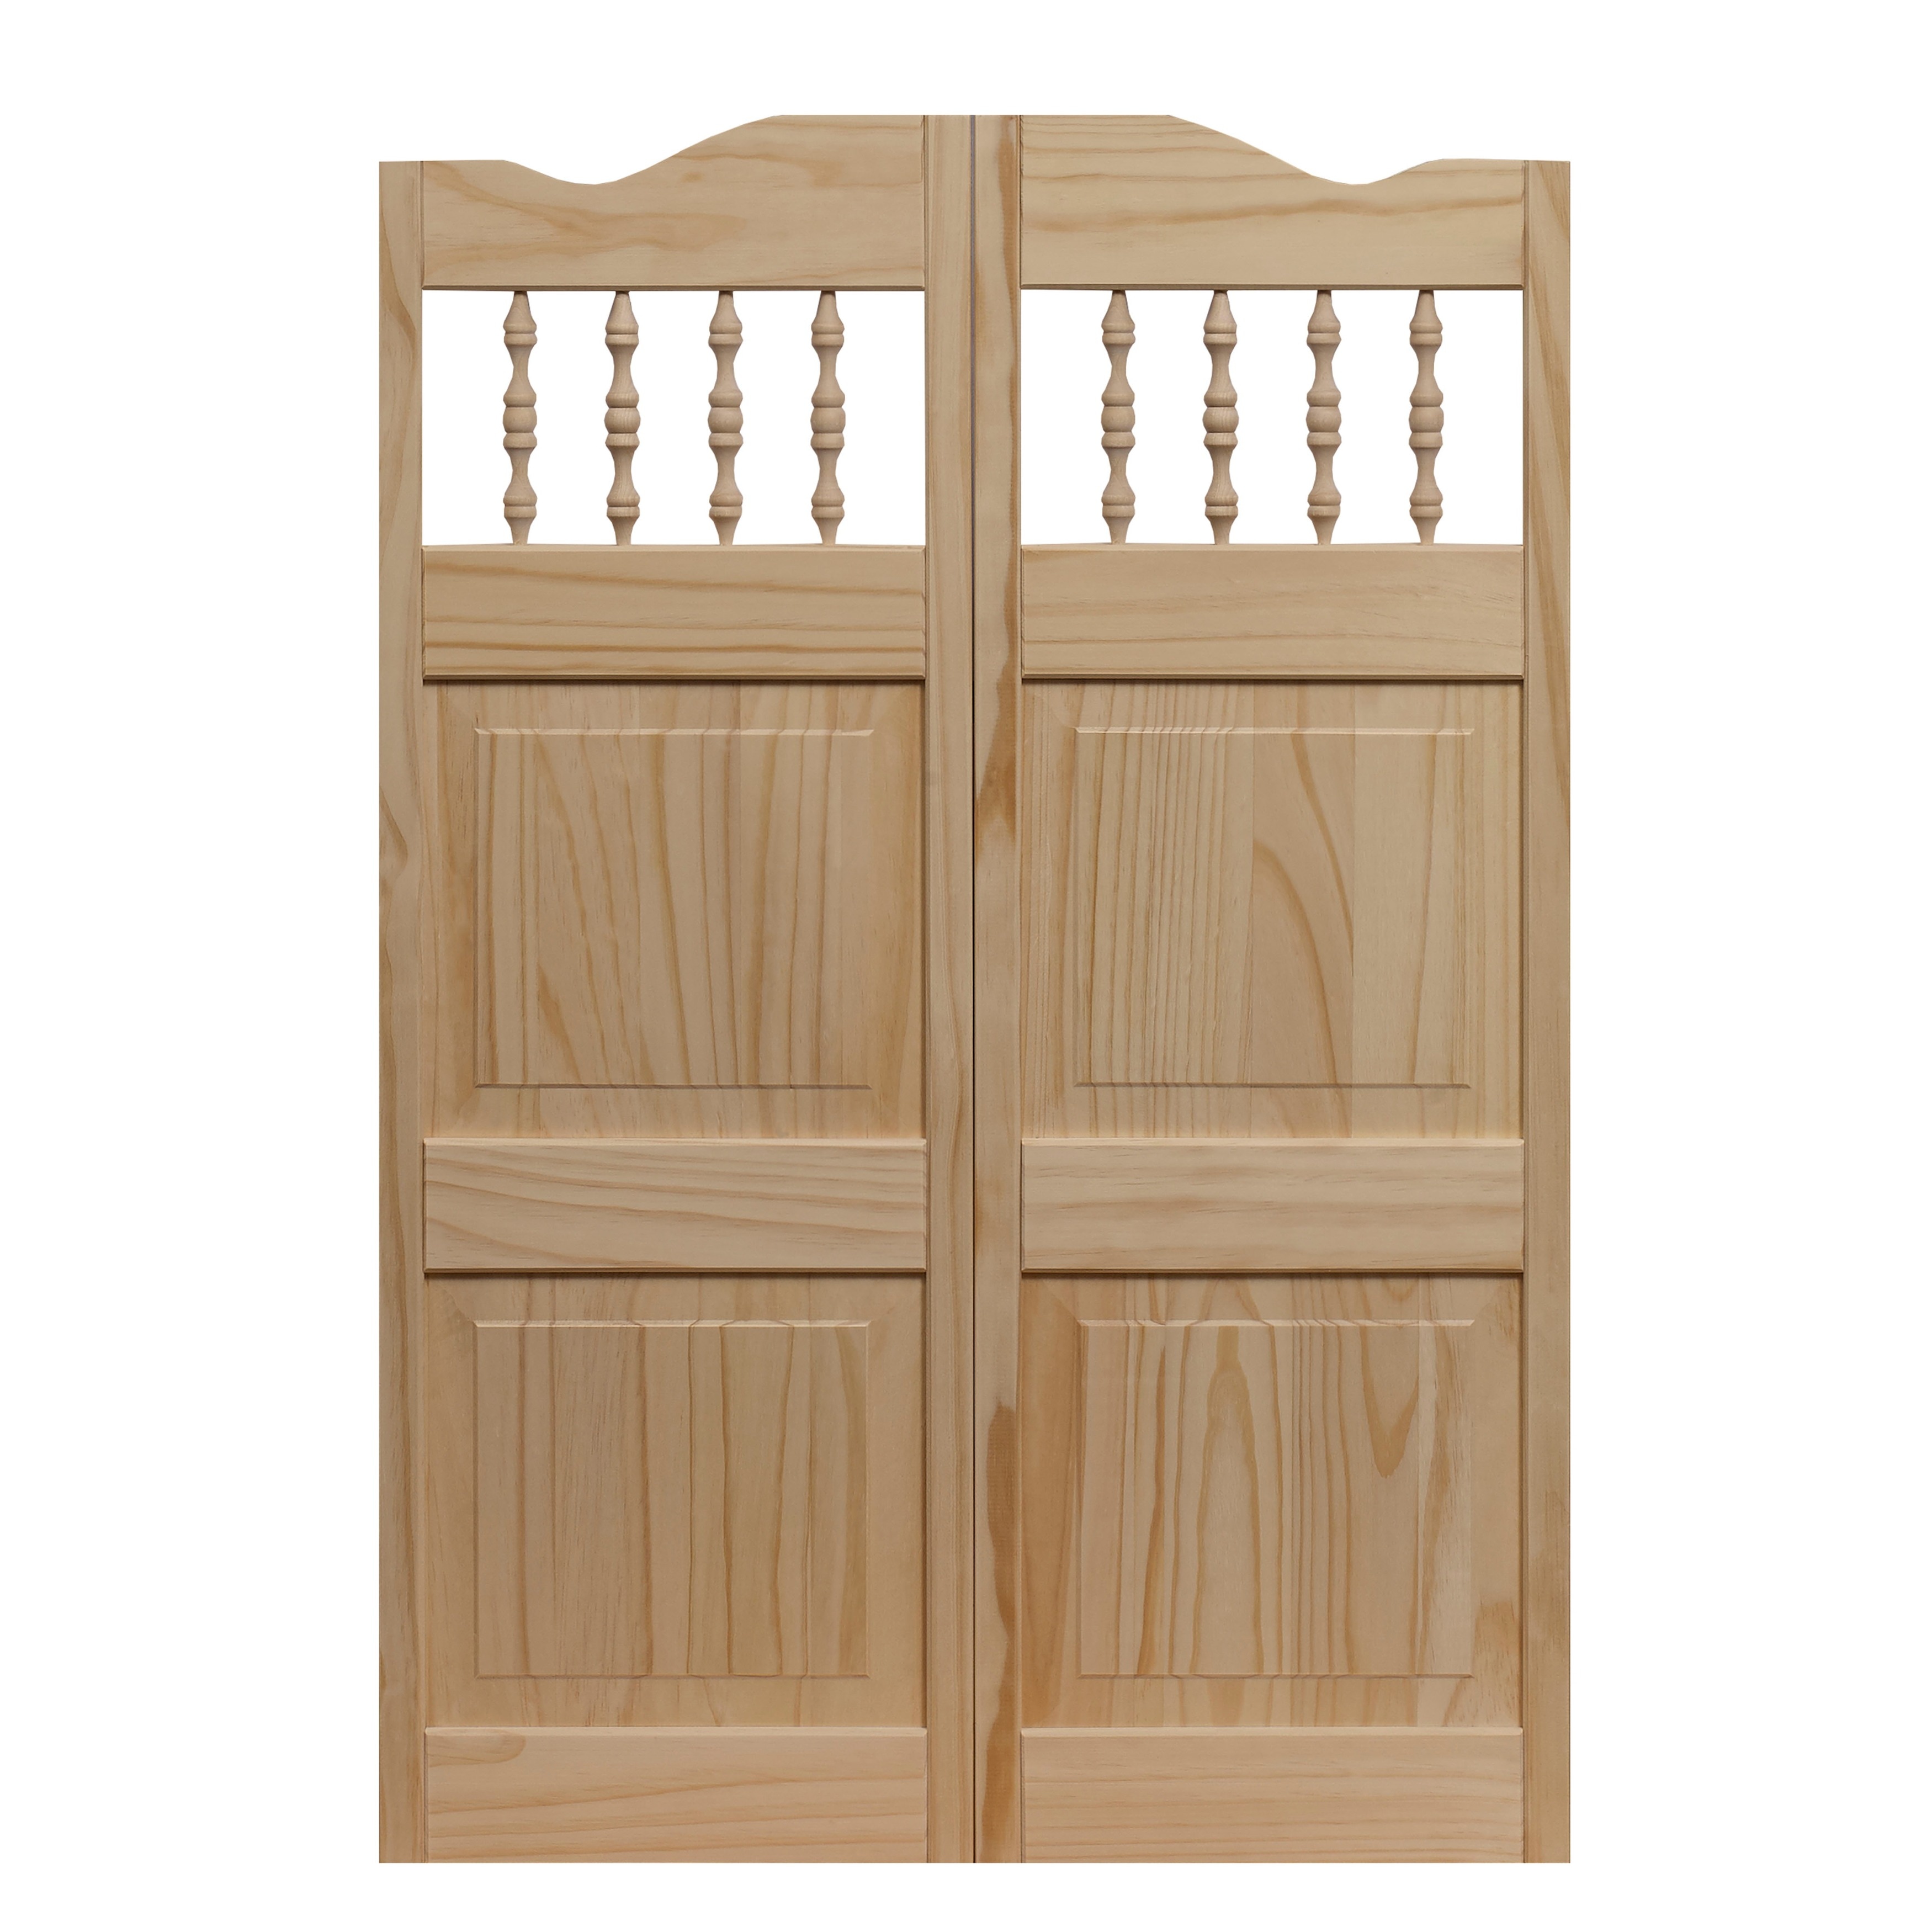 Shop American Wood Carson City Spindle Top Cafe Door Overstock